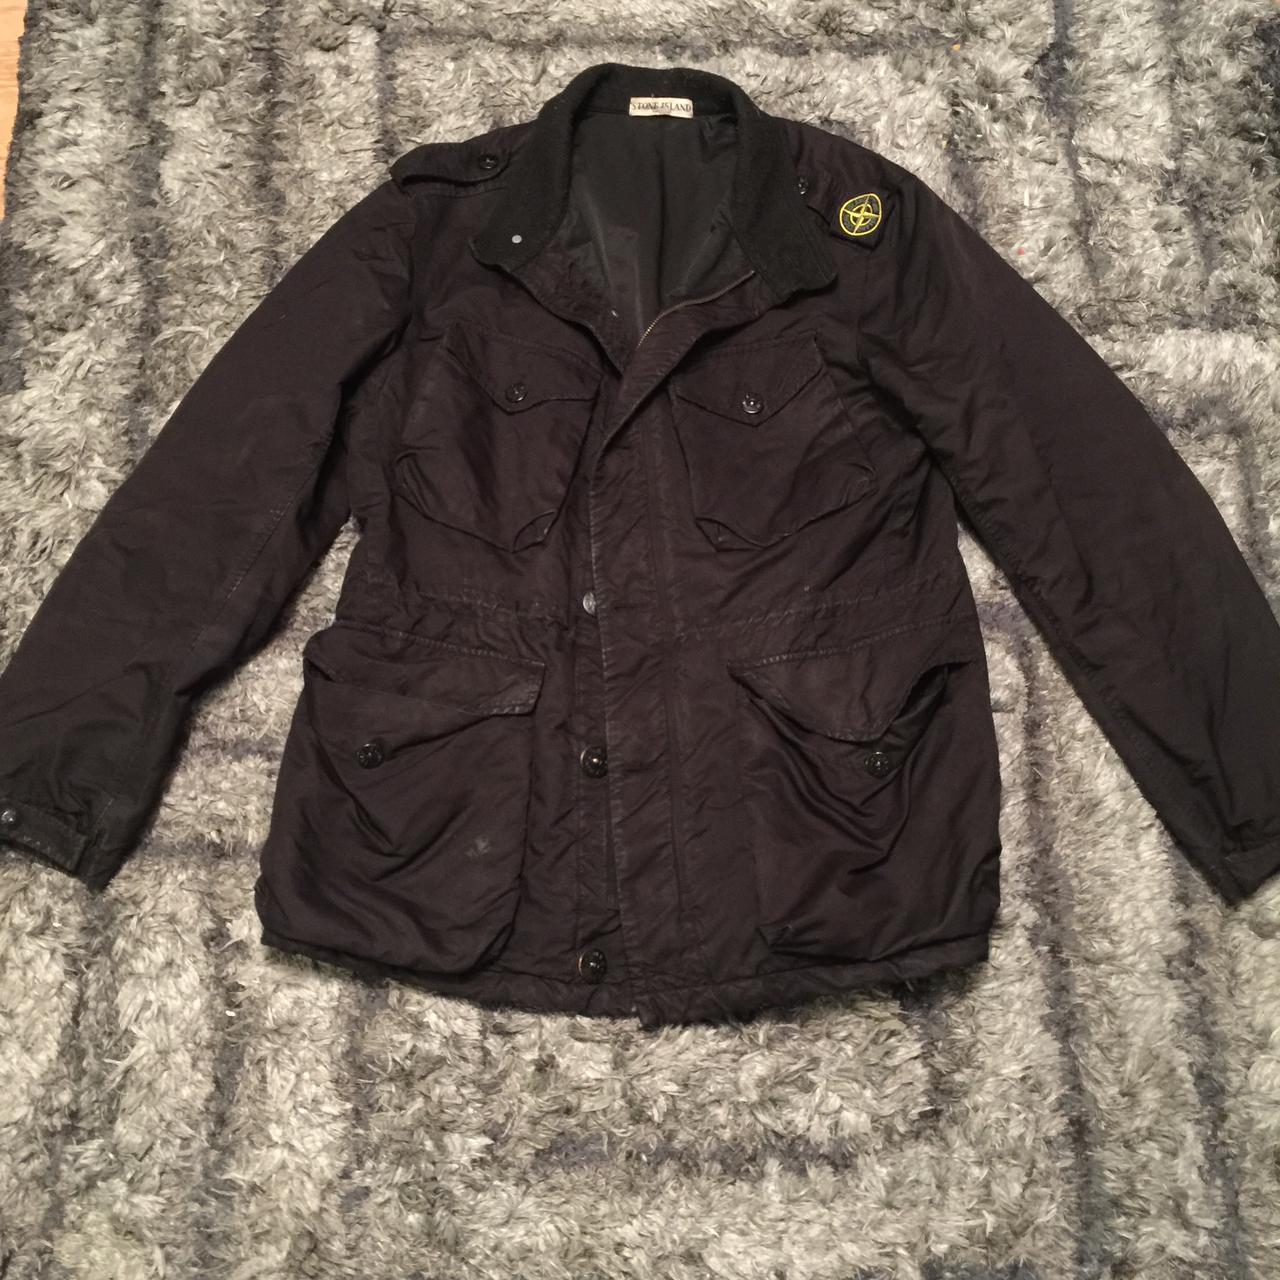 Stone island men's military jacket good used condition - Depop